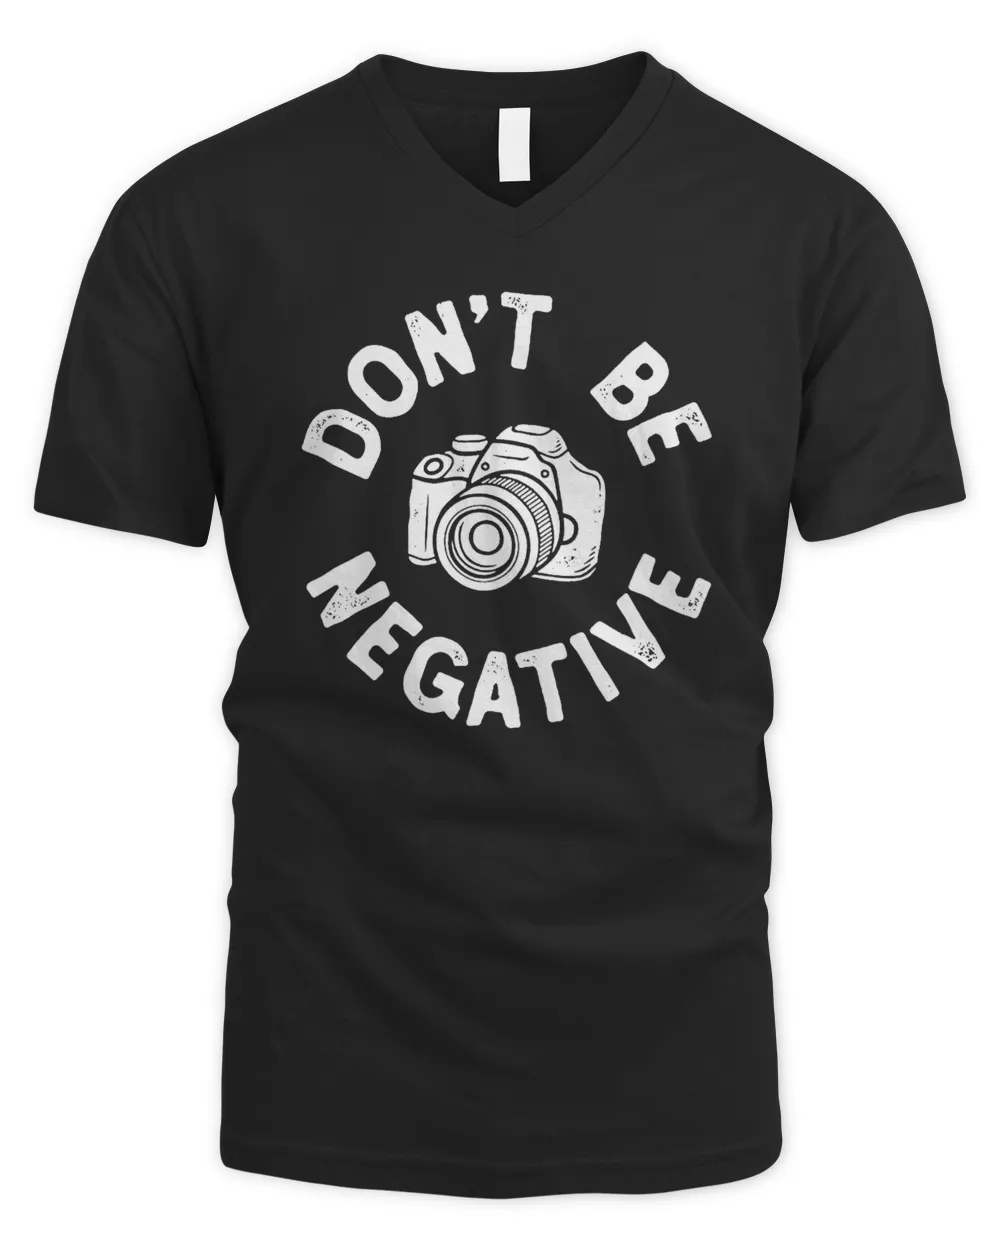 Don't Be Negative